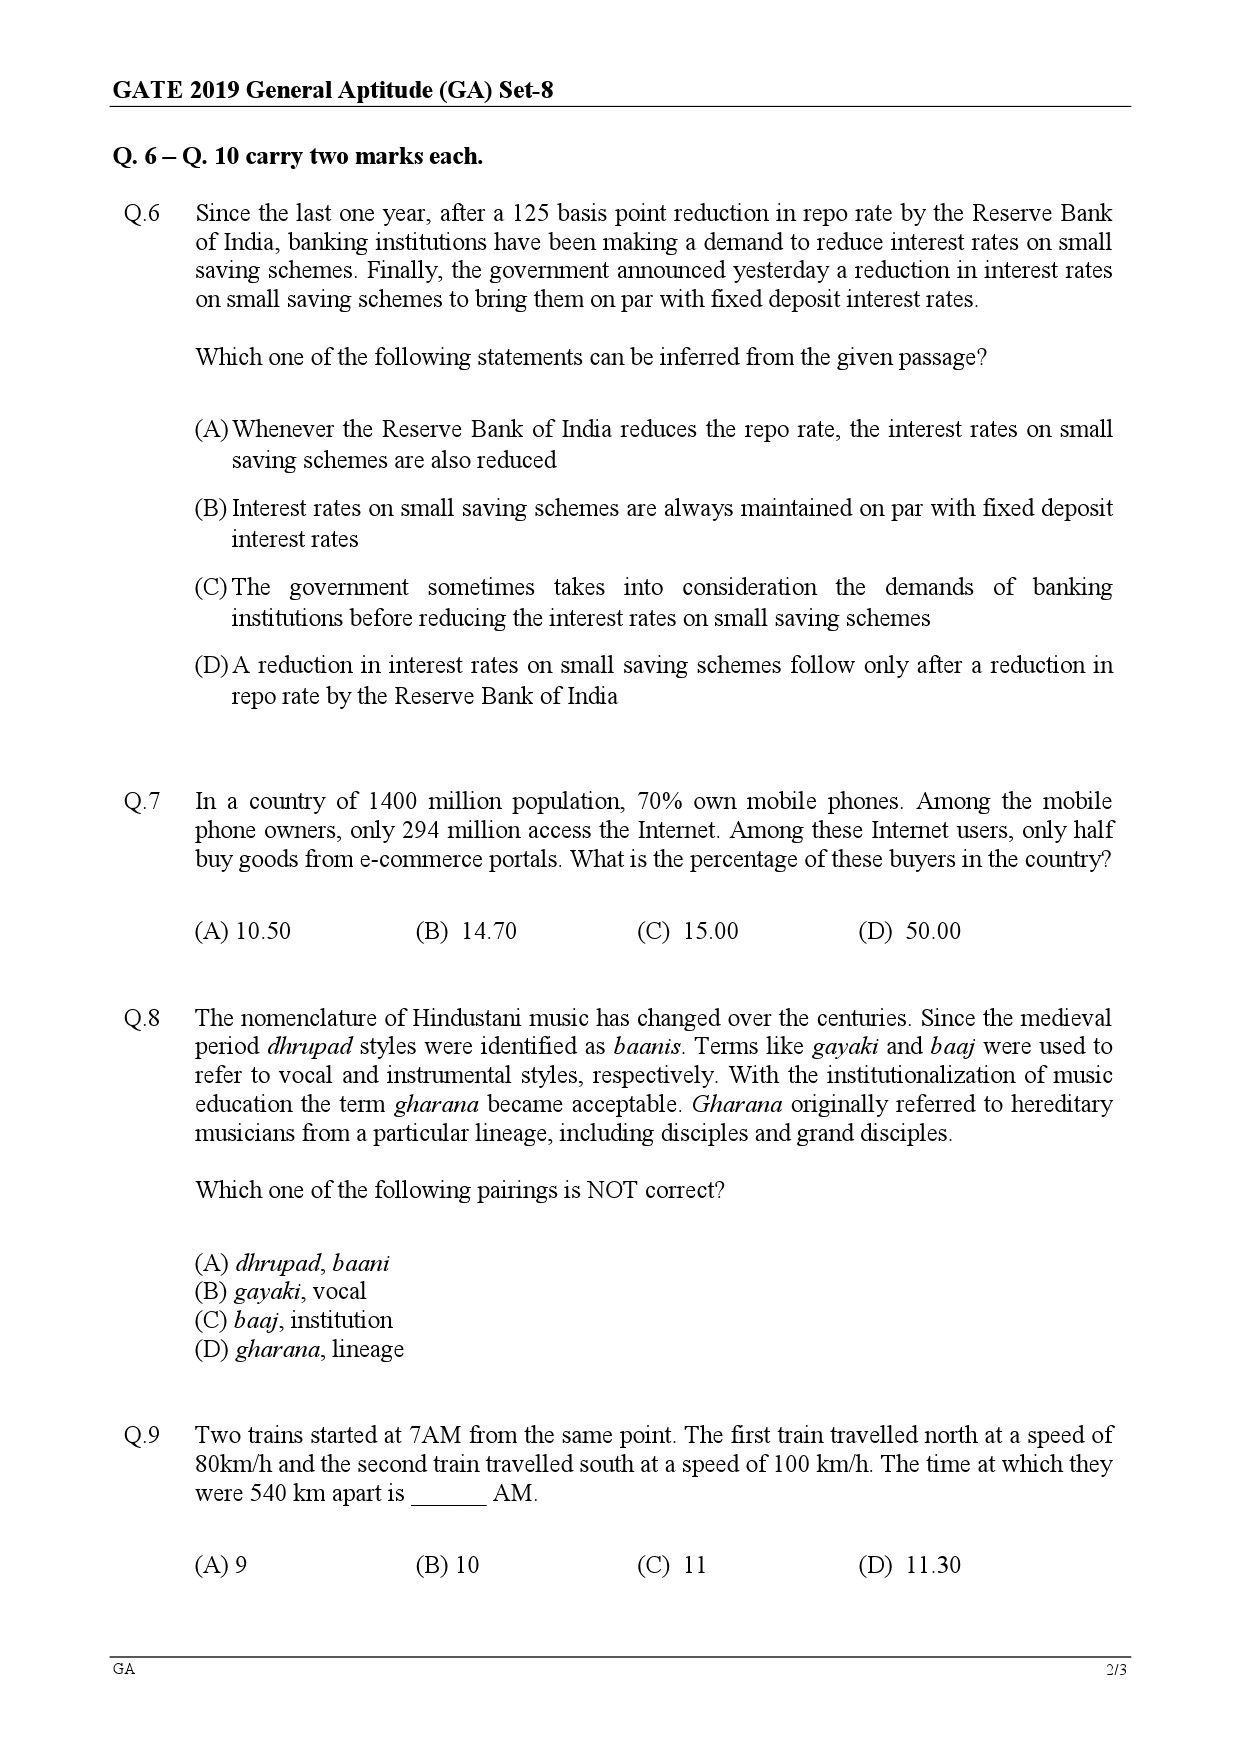 GATE Exam Question Paper 2019 Architecture and Planning 2